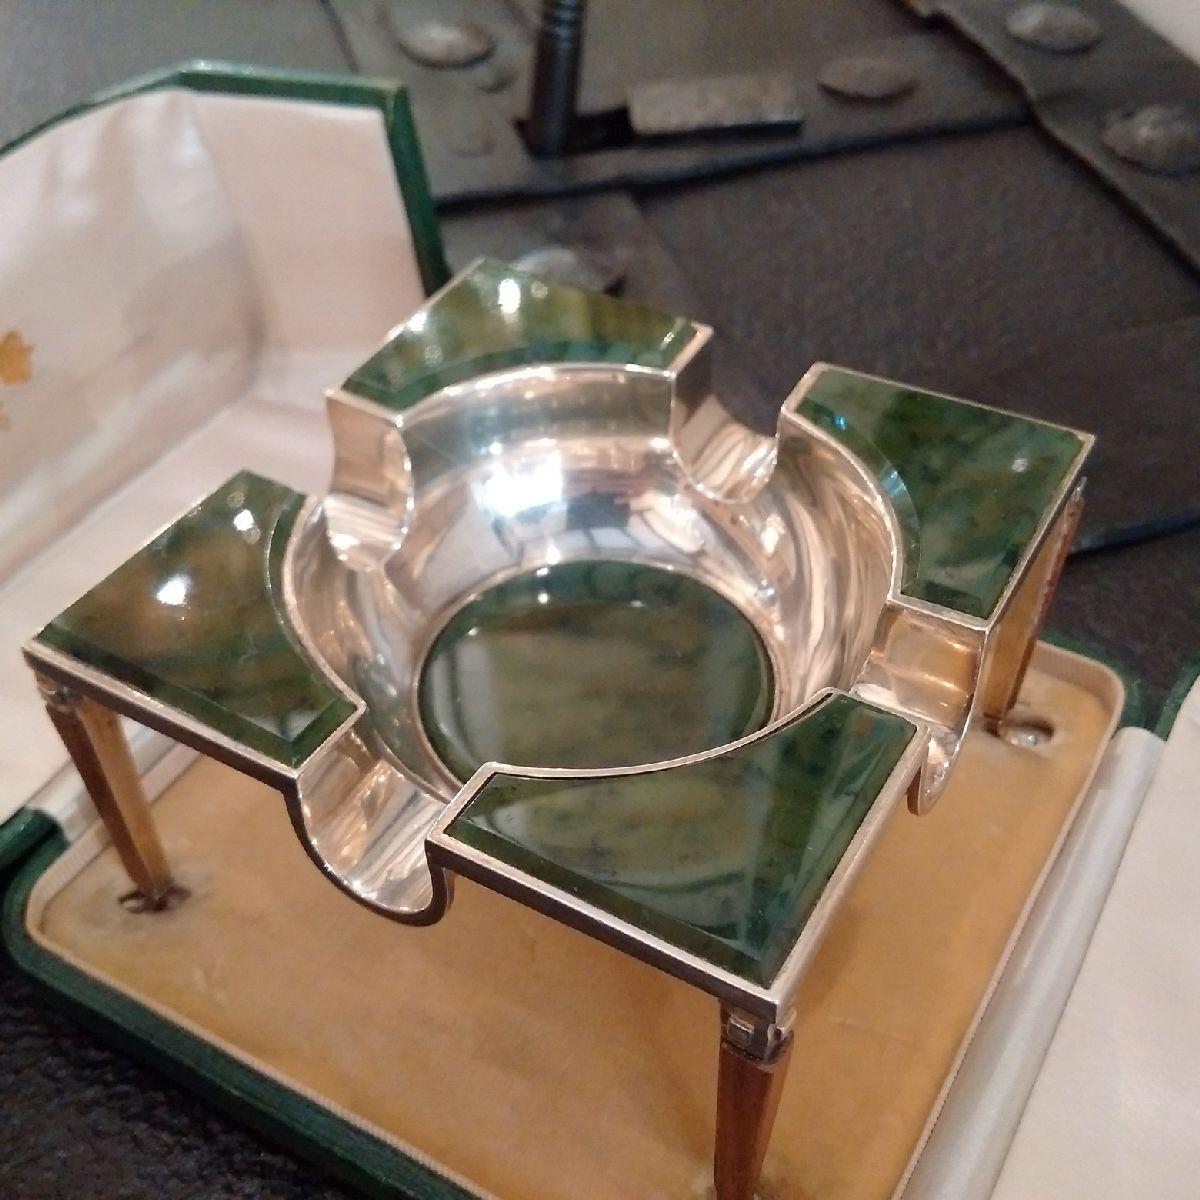 Kendall & Co. of Paris

A highly unusual green onyx and Sterling silver cigar ashtray, the central bowl also lined with onyx features four, wide cigar rests, and the tray is set on four tapered furniture-style legs, with hardwood trim all